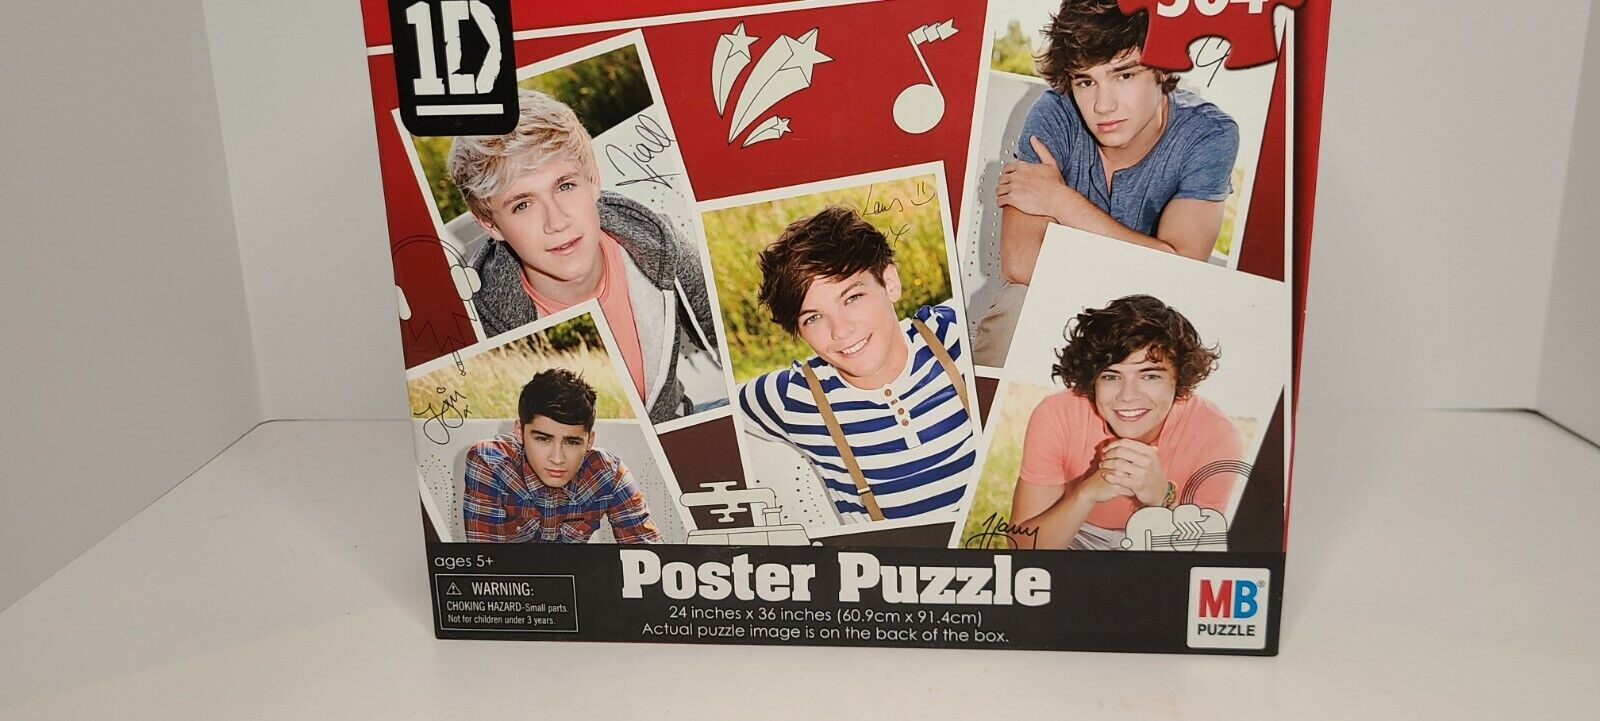 1D One Direction Poster Set Unopened 可愛いクリスマスツリーやギフトが 【限定セール！】 Puzzle Collectible